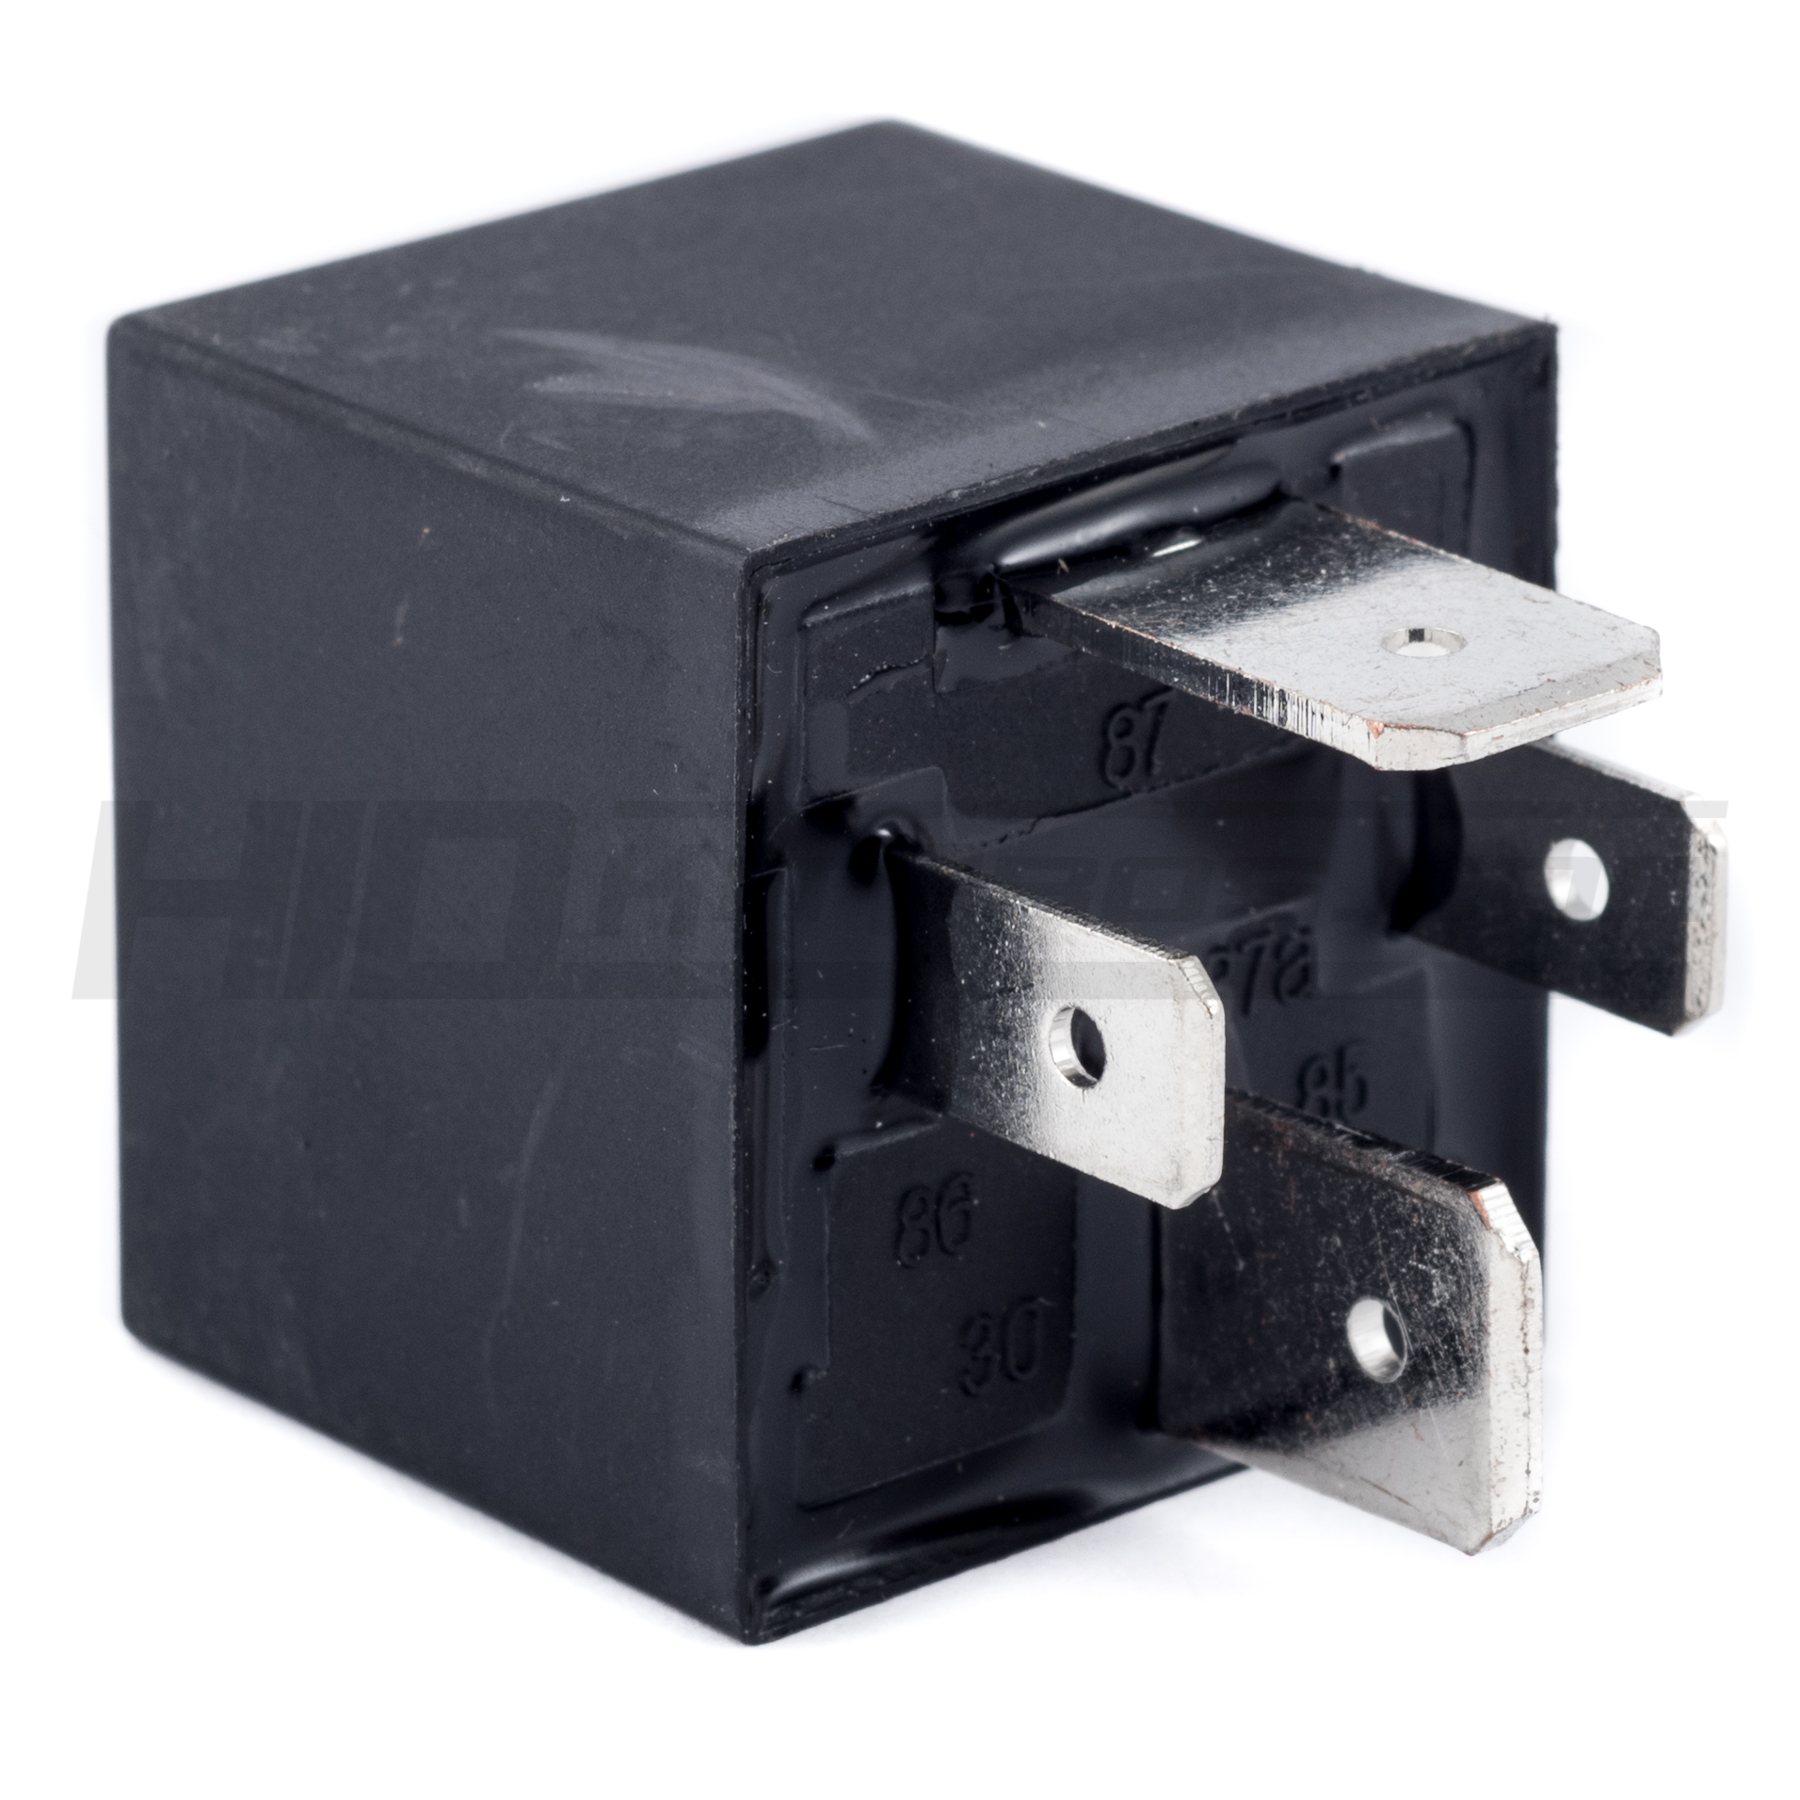 Details about   10 X Car Truck Auto Automotive DC 12V 100A 100 AMP SPST Relay Relays 4 Pin 4P 